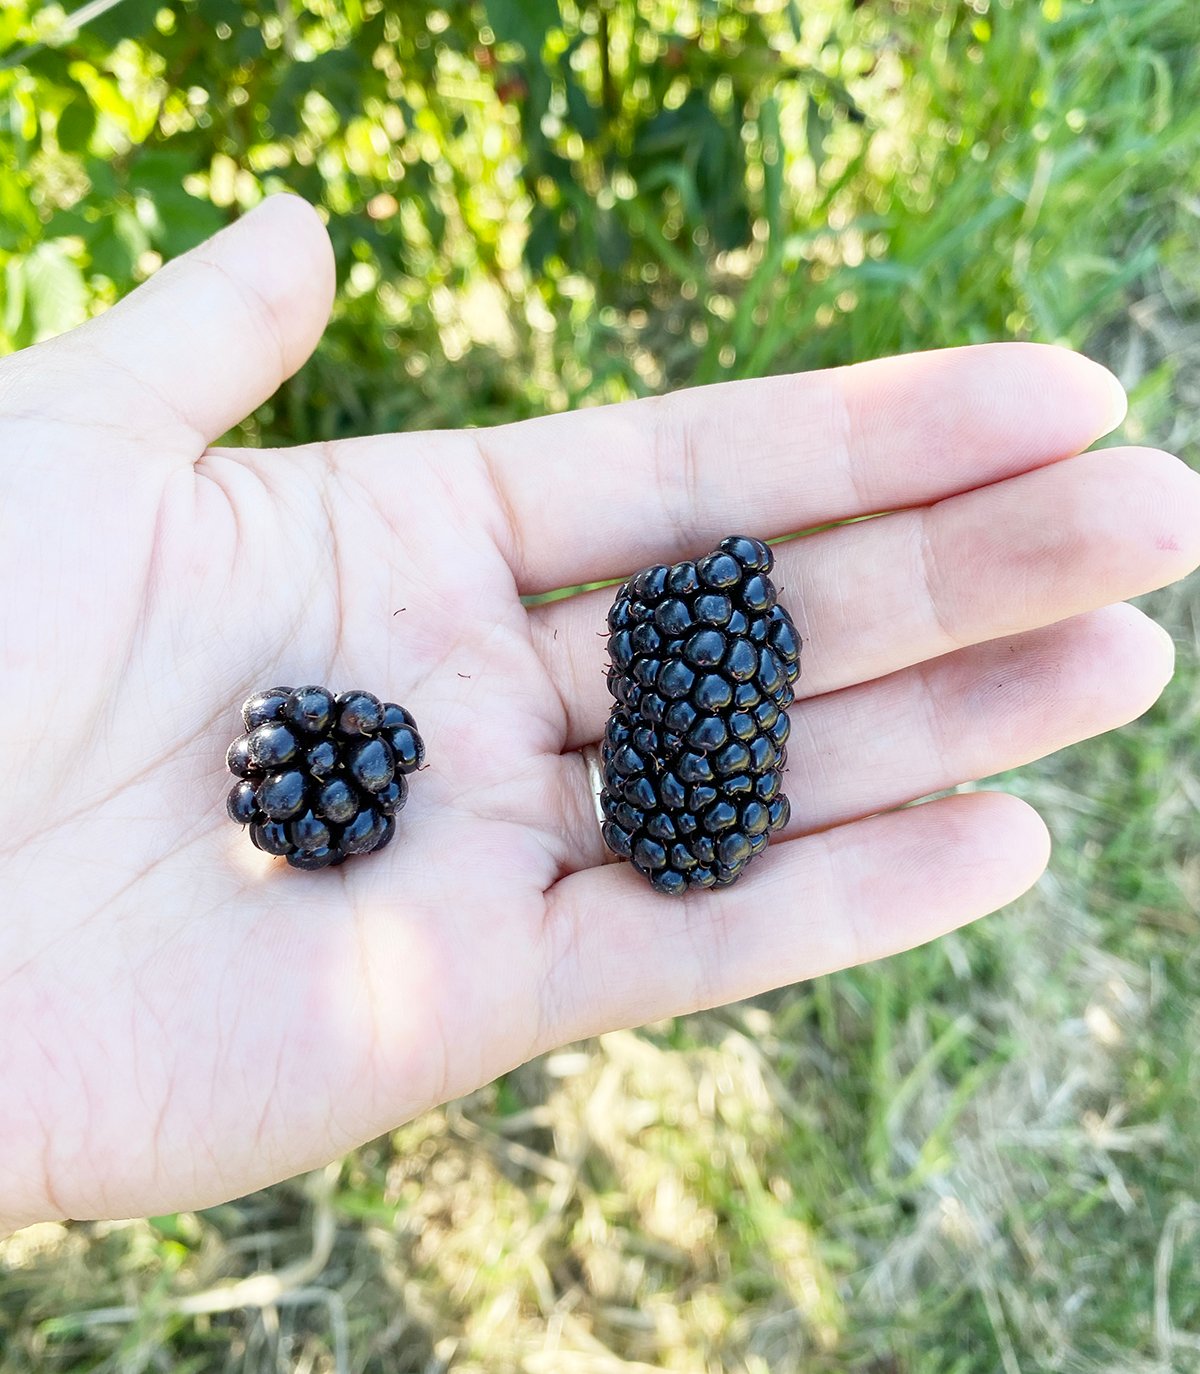 blackberry and marion berry in the palm of a hand